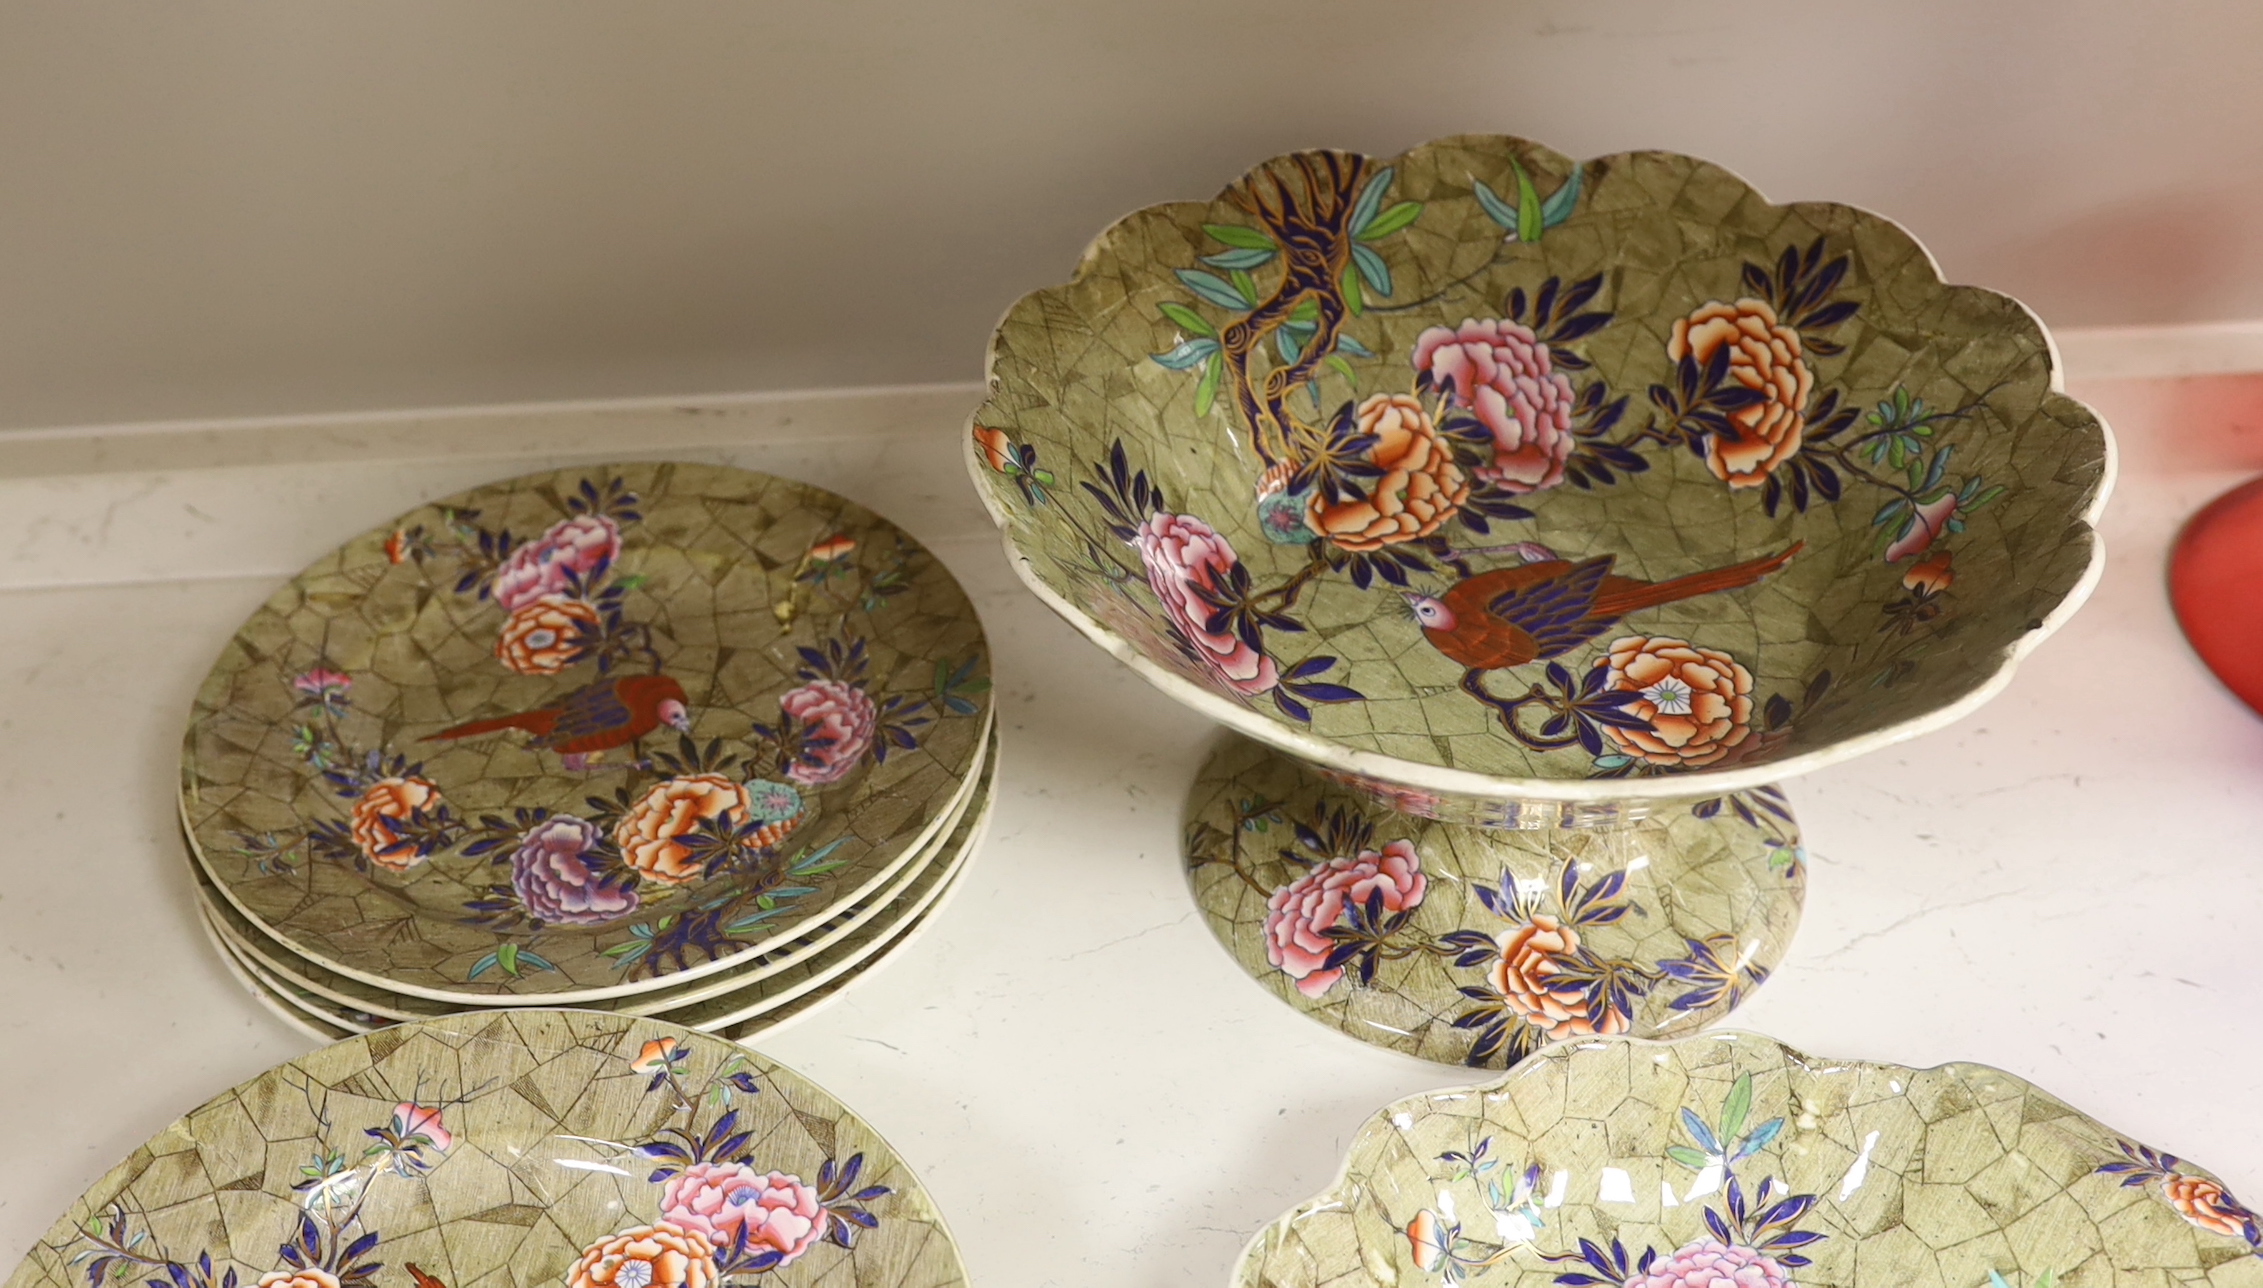 A Spode ‘Tumbledown Dick’ part dessert service, early 19th century, decorated with birds and flowers